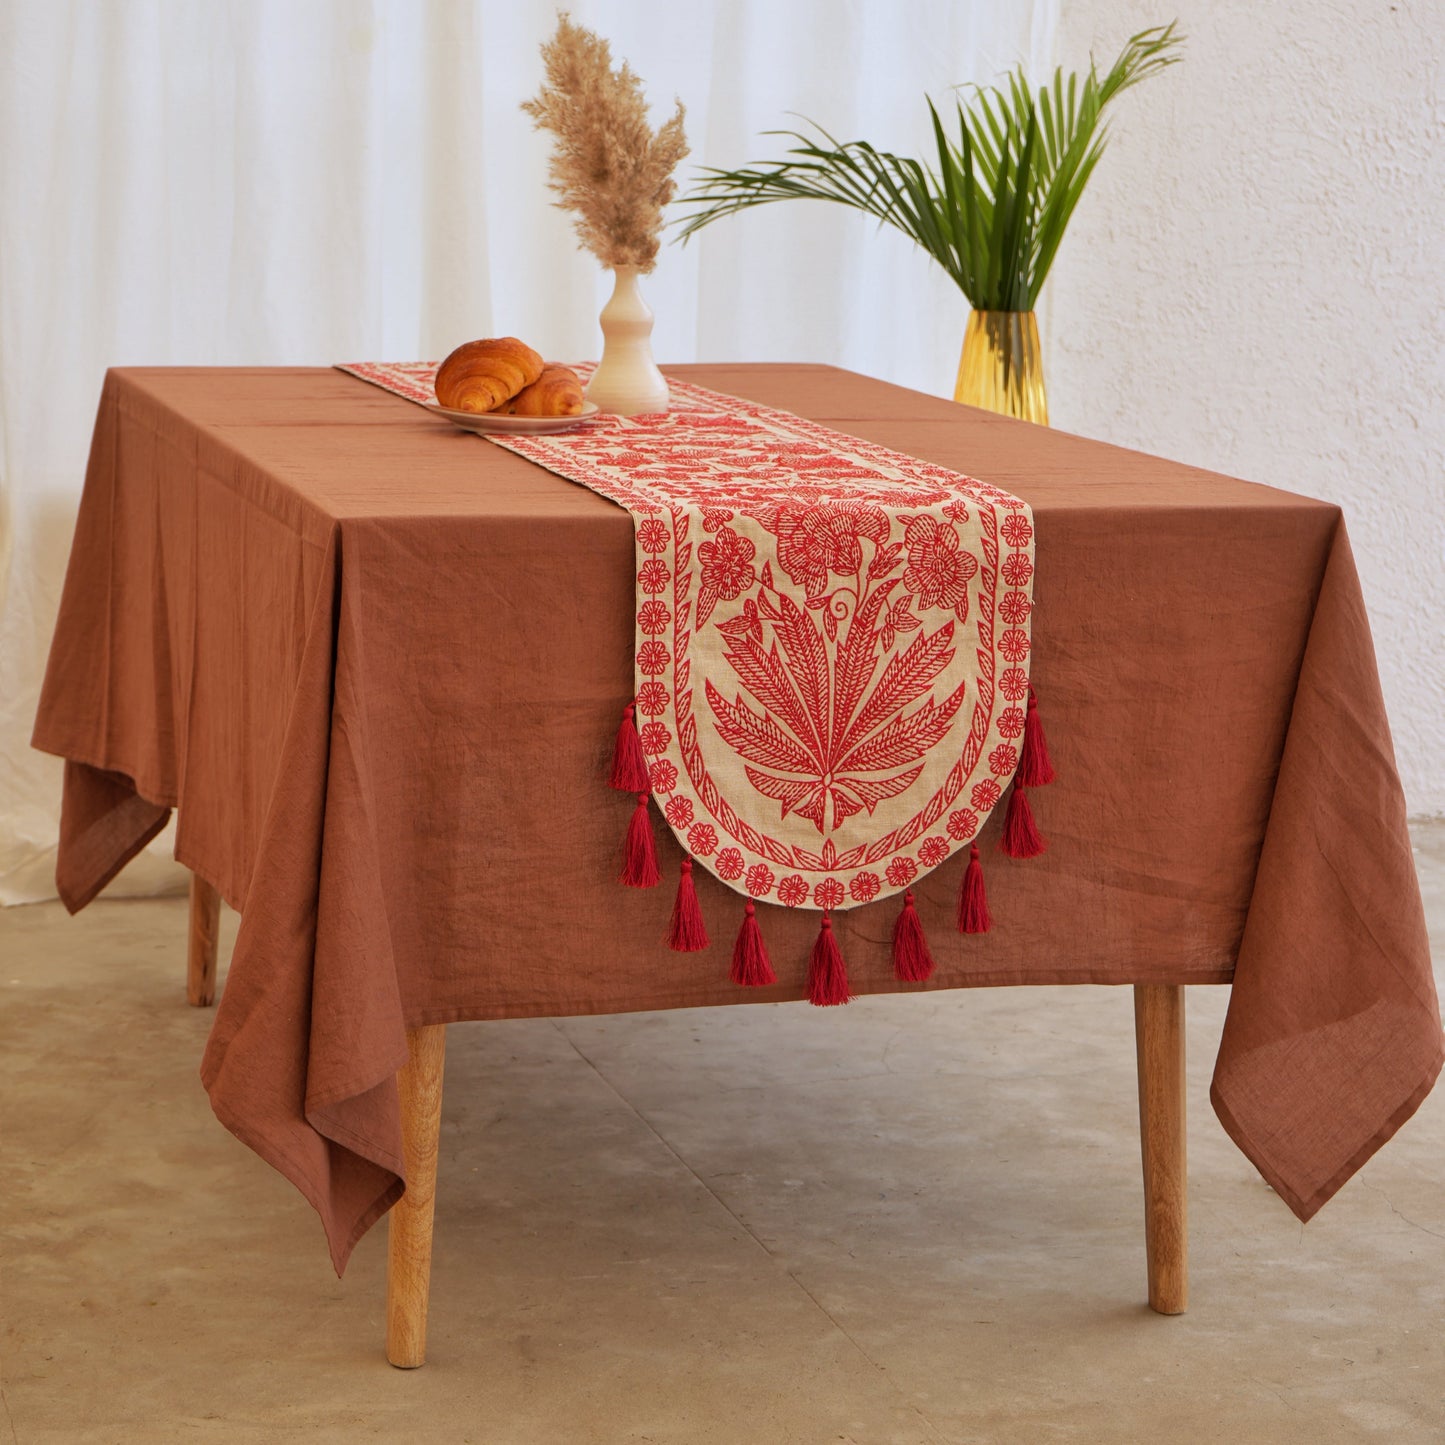 Red Wanderlust Boho Chic Table Placemat - I